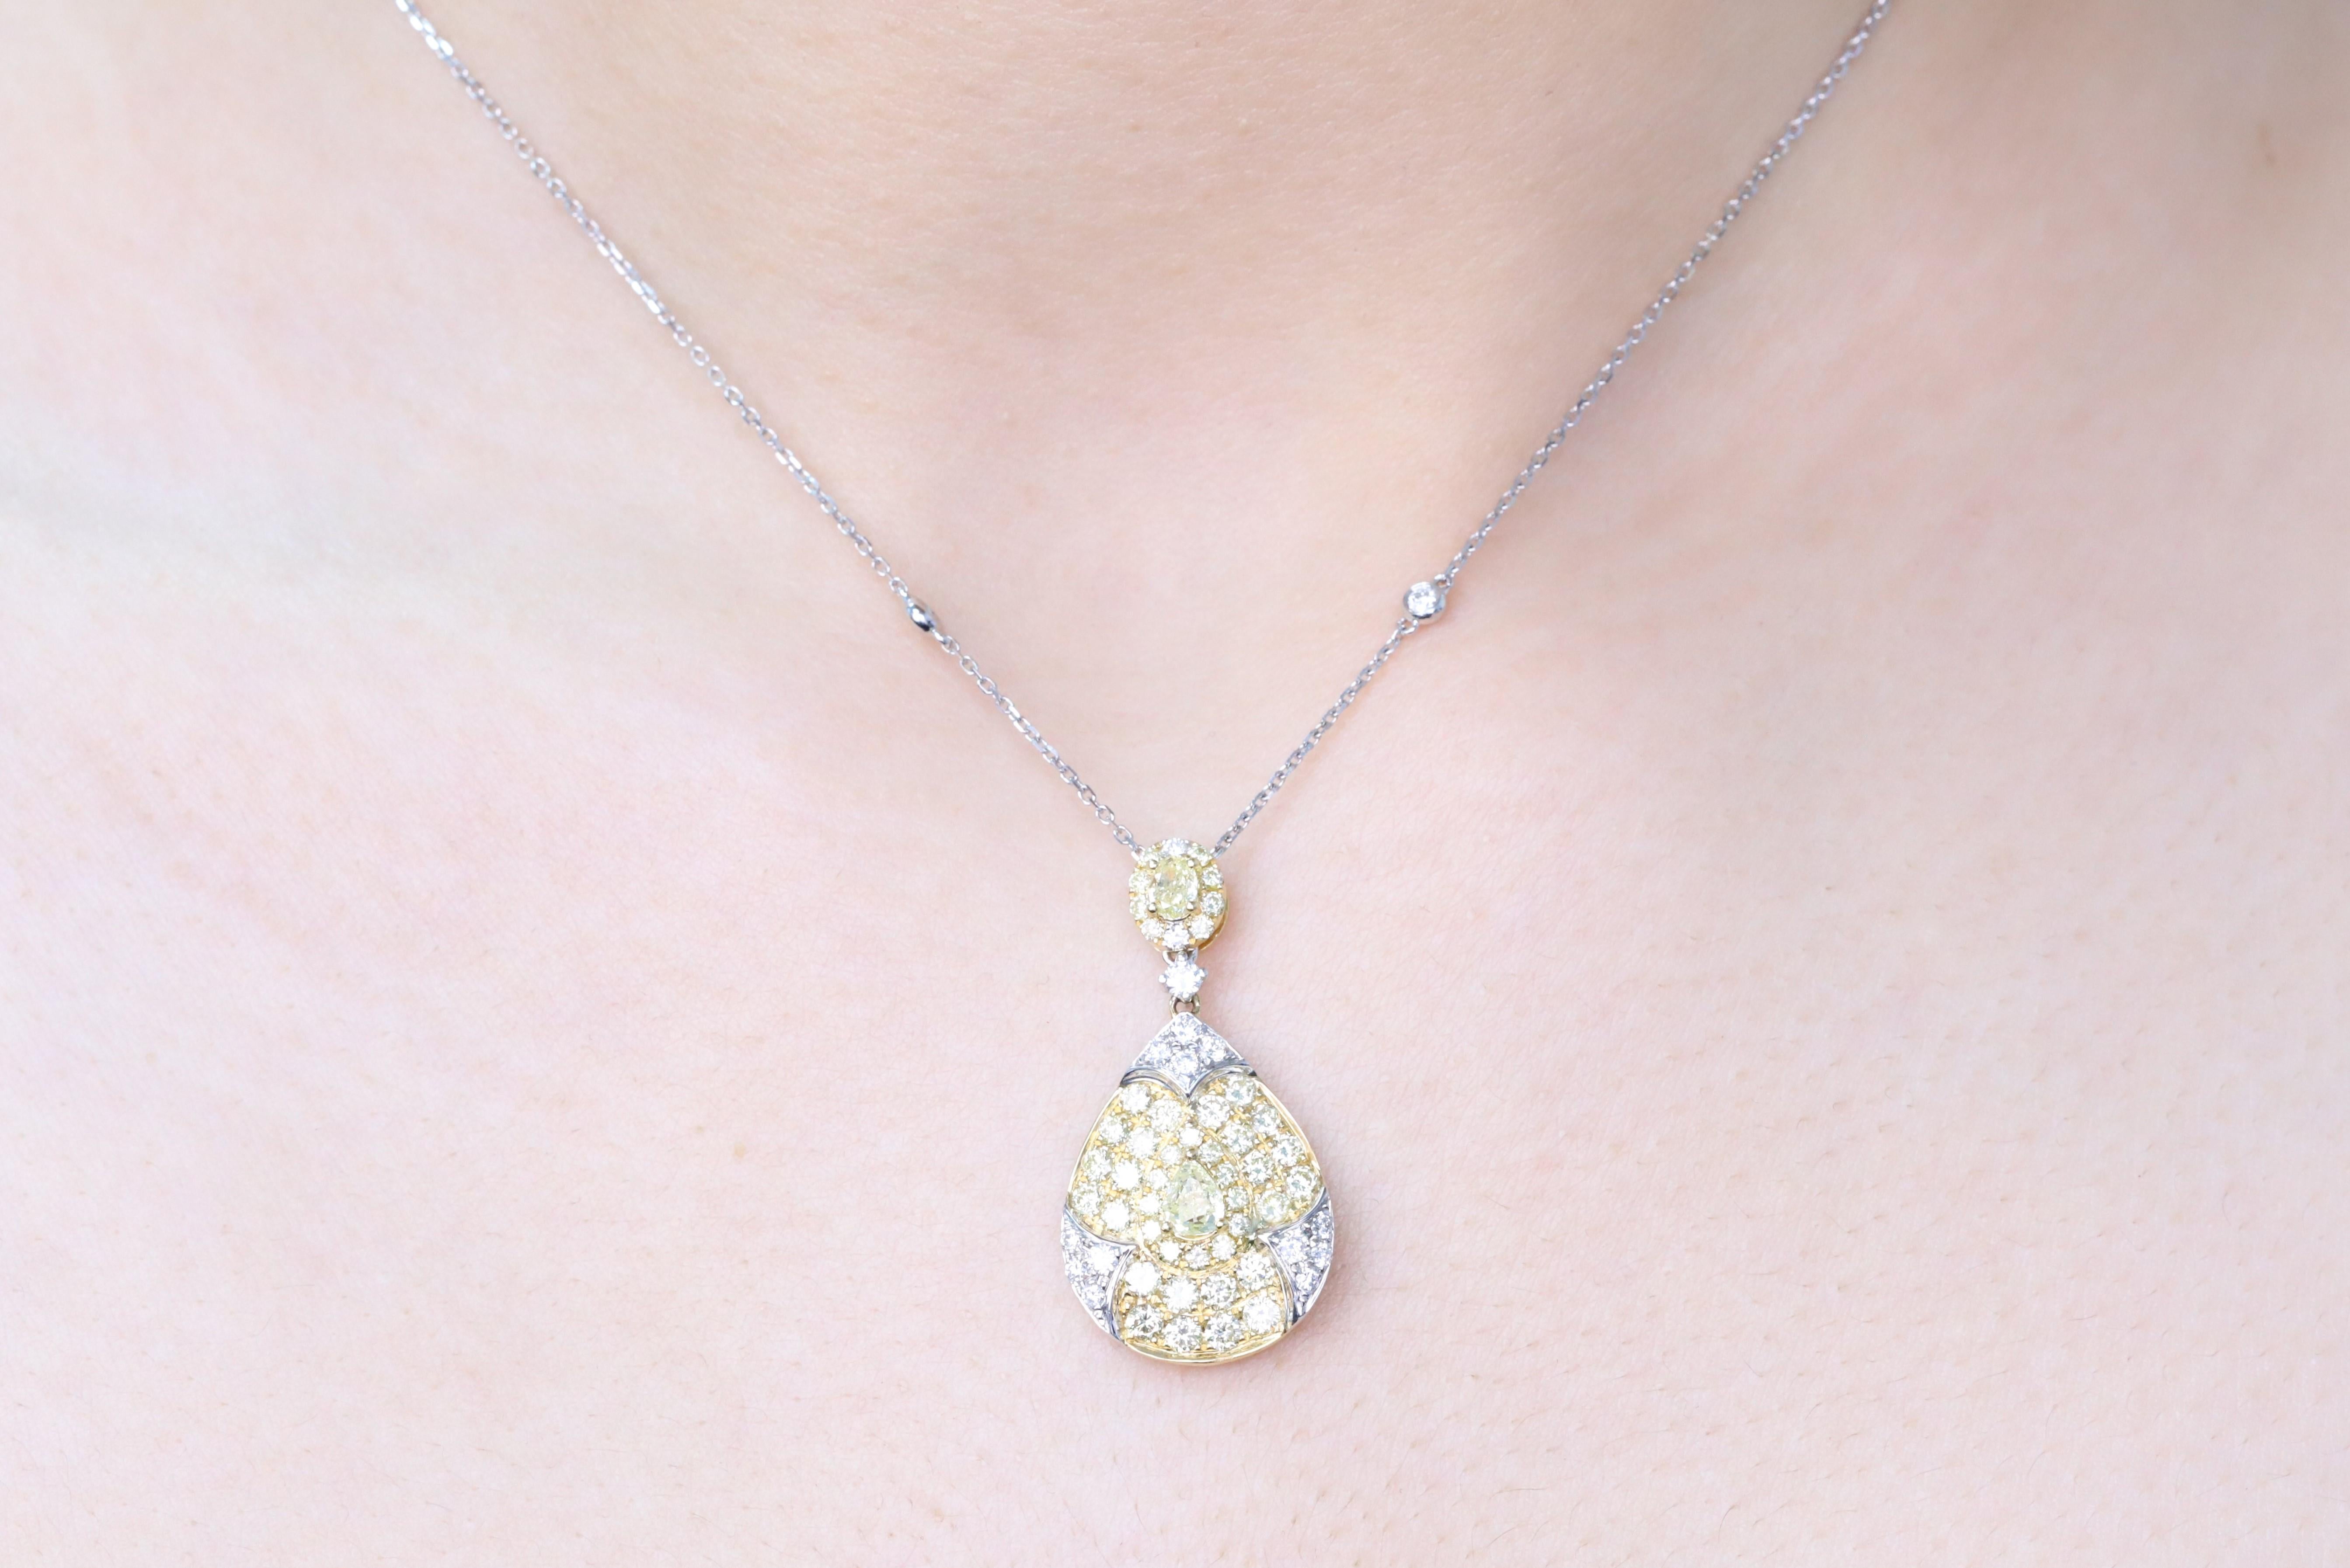 Decorate yourself in elegance with this Pendant is crafted from 18-karat Two Tone Gold by Gin & Grace. This Pendant is made up of oval, Pear-Cut (2 pcs) 0.54 carat Round-cut Yellow Diamond (44 pcs) 1.25 carat and Round-cut White Diamond (17 Pcs)